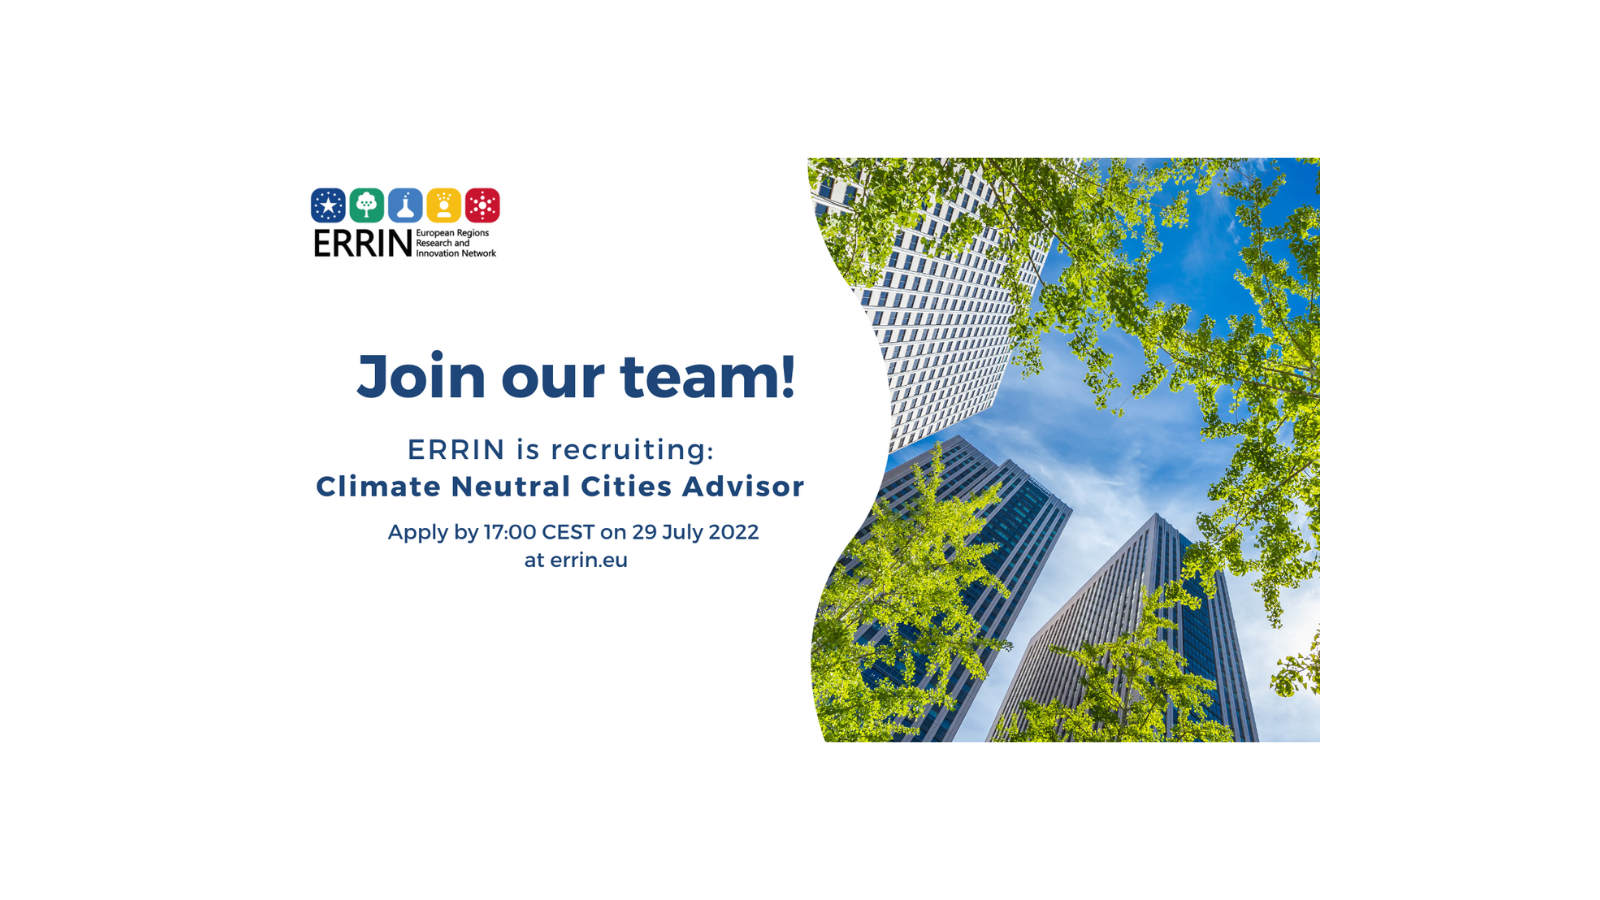 ERRIN is looking for a Climate Neutral Cities Advisor (deadline: 29 July)